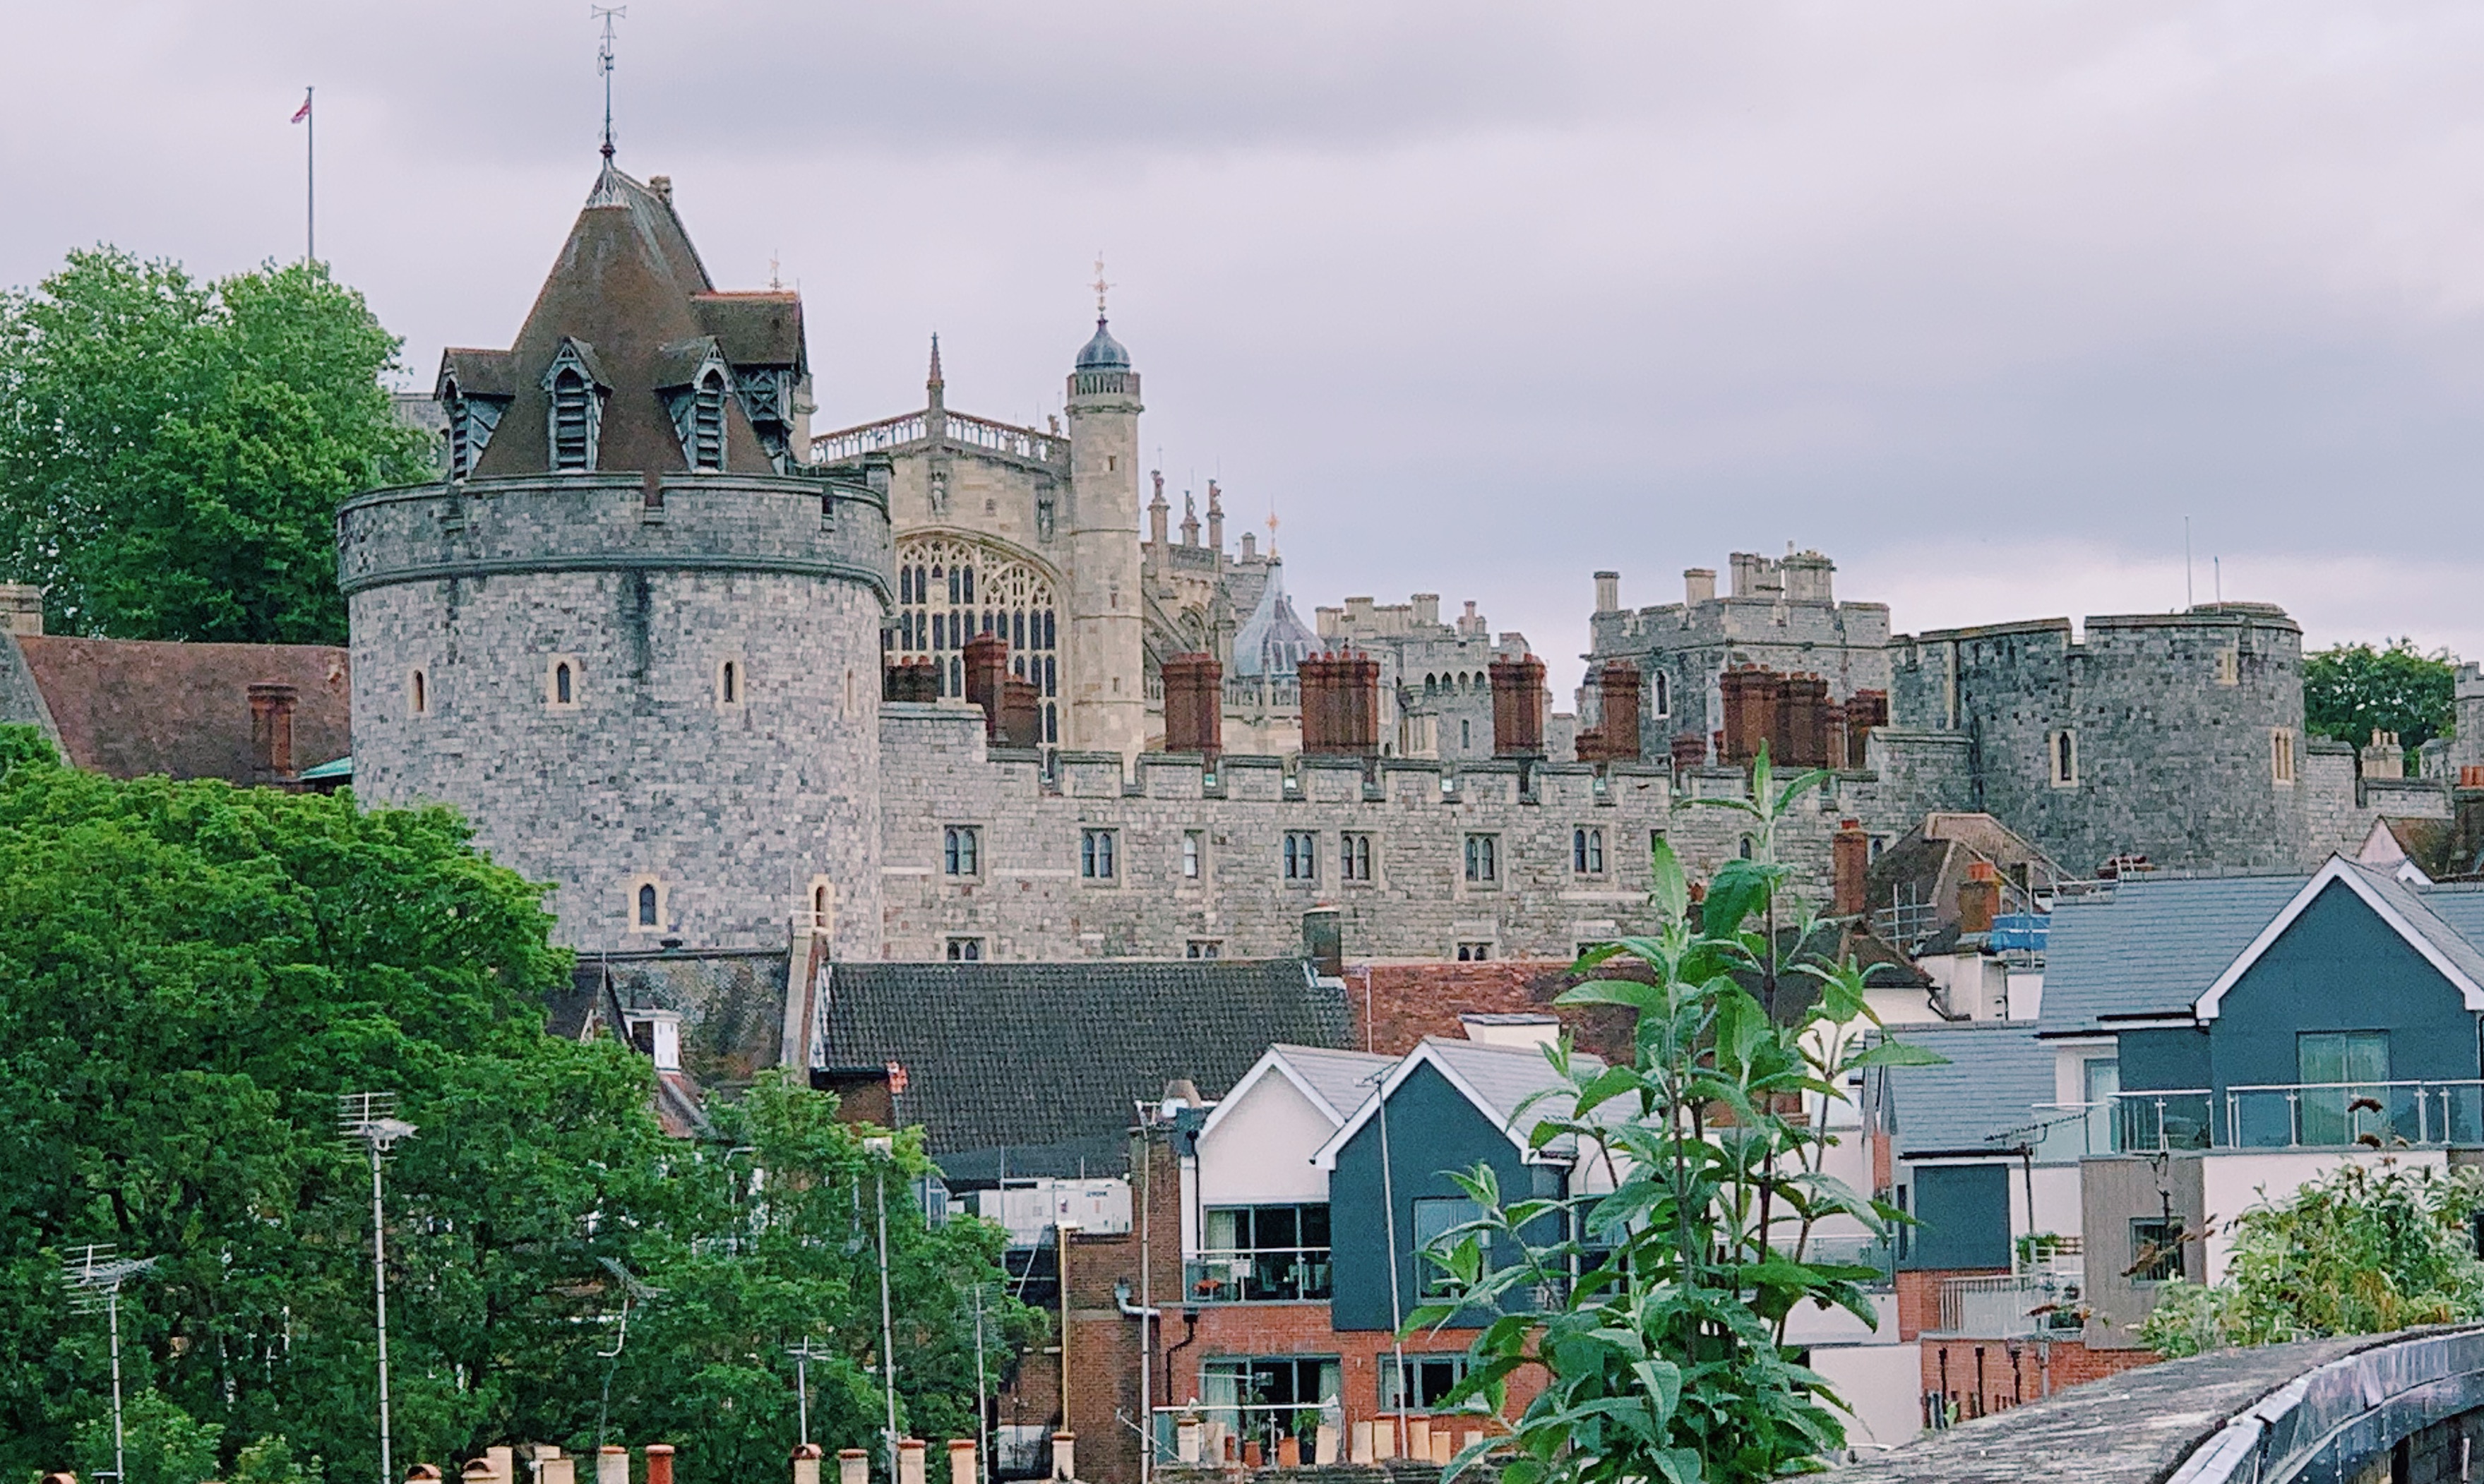 View of Windsor Castle from town